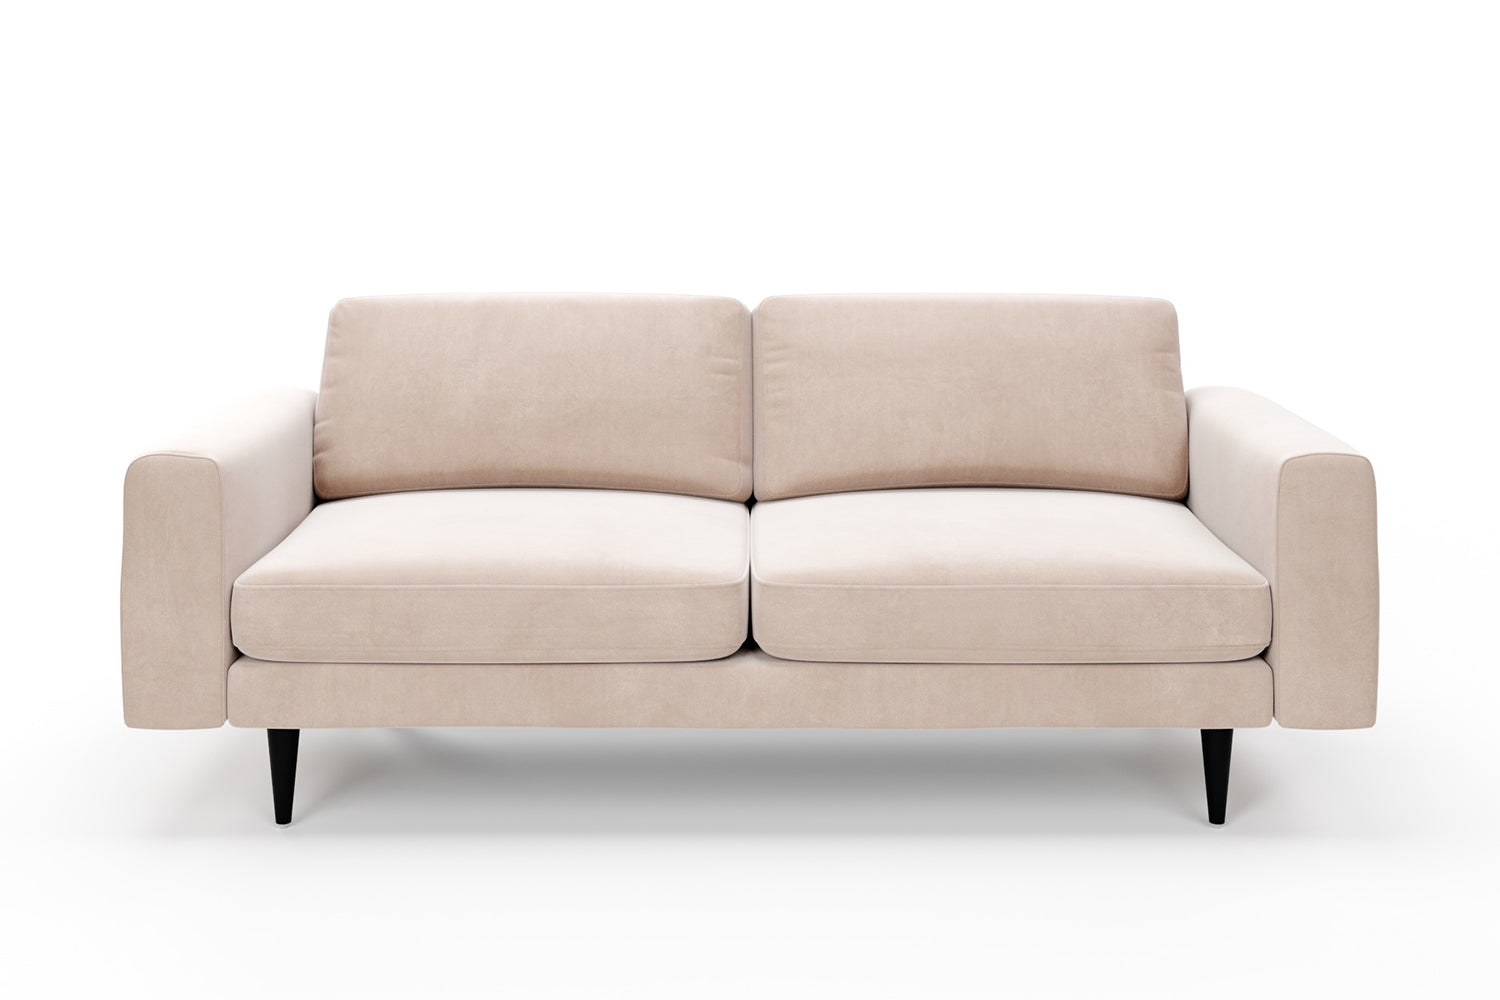 SNUG | The Big Chill 3 Seater Sofa in Taupe variant_40414879088688